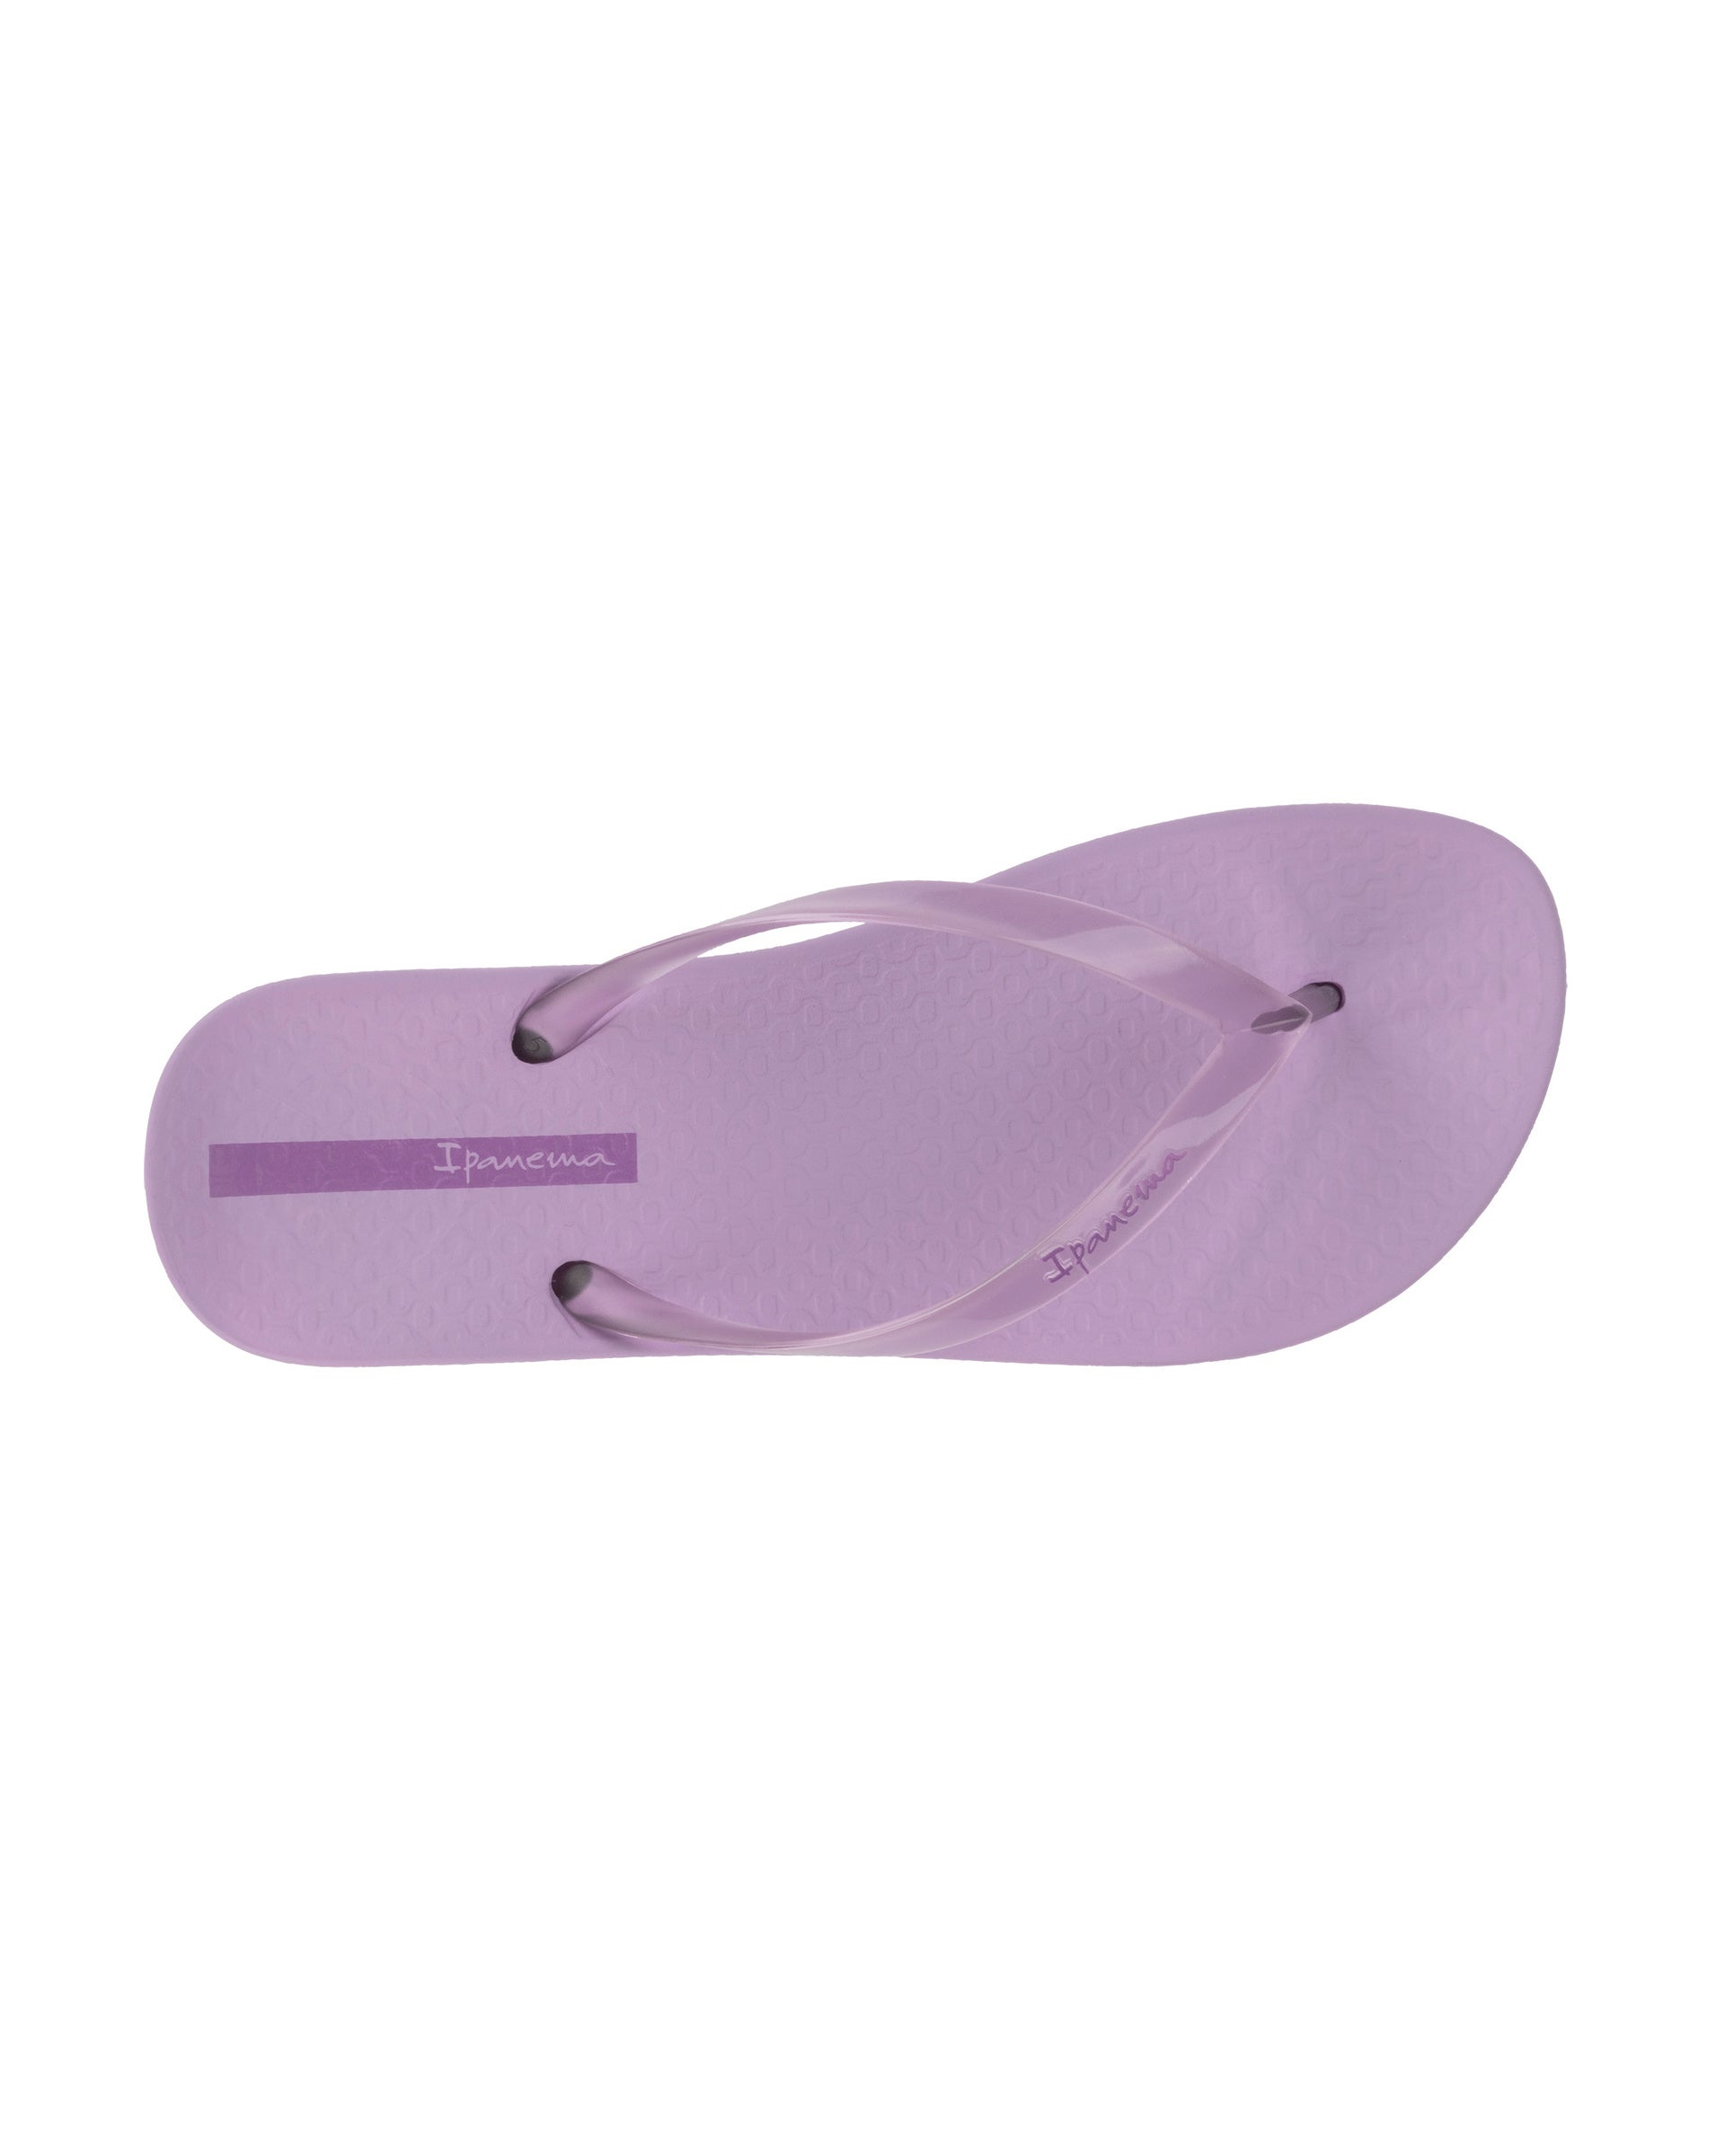 Top view of a purple Ipanema Ana Connect women's flip flop with a clear purple strap.